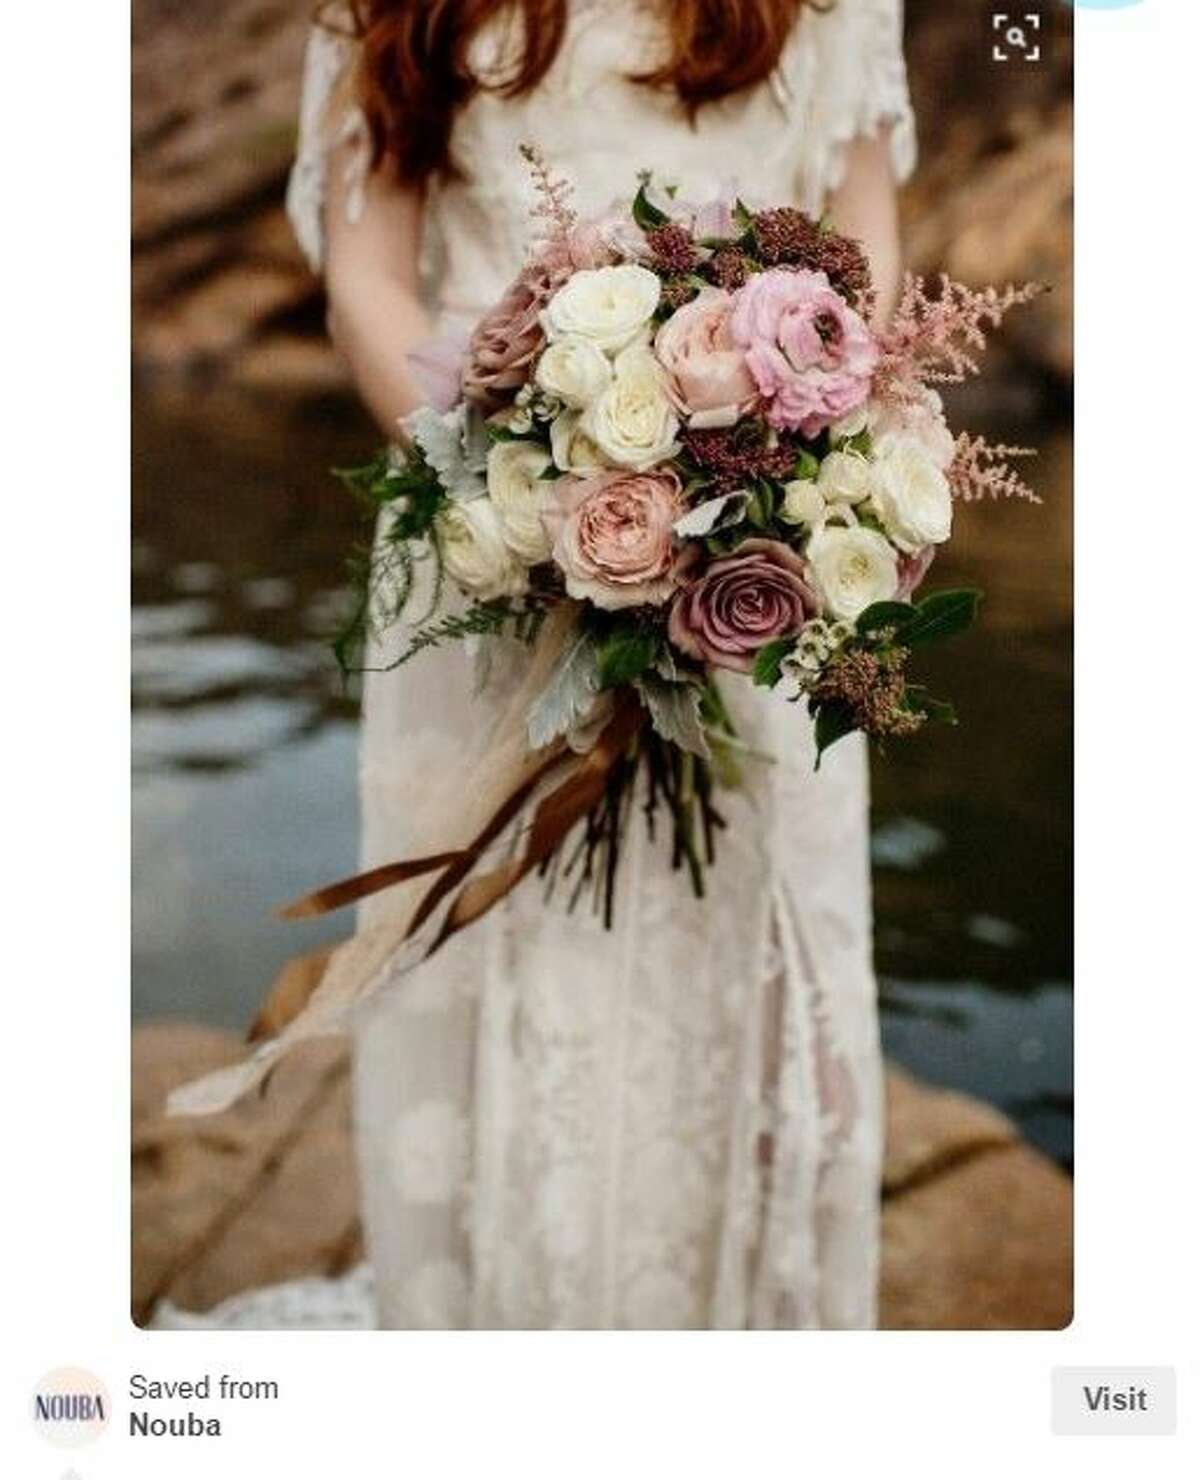 A blushing bouquet for a blushing bride Photo: Pinterest